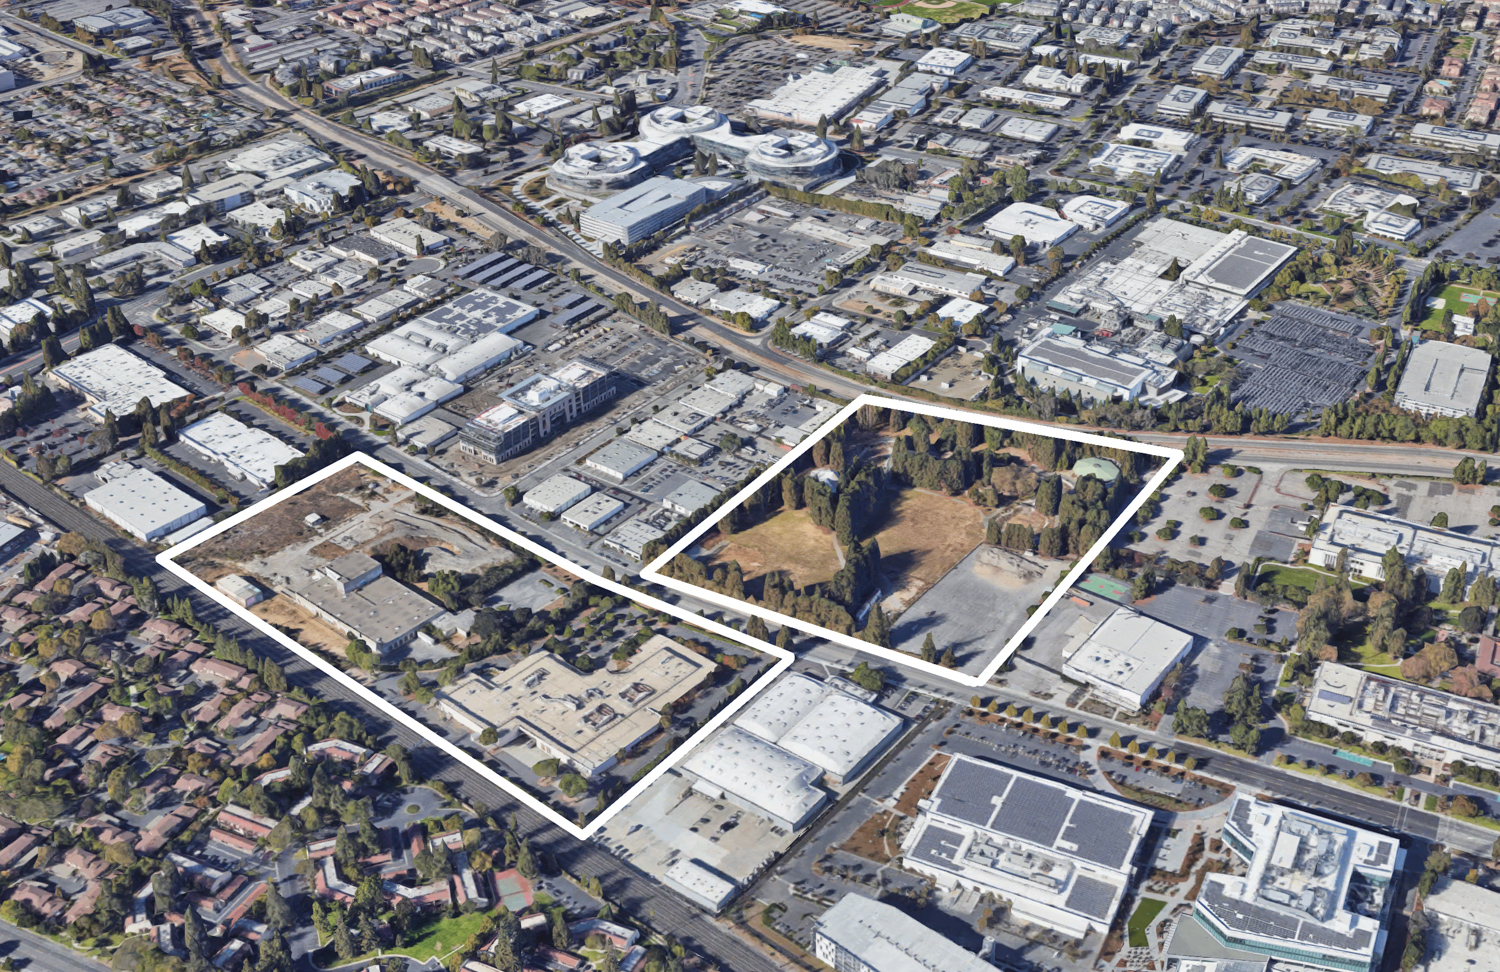 Intuitive Offices area existing condition along Kifer Street, image via Google Satellite